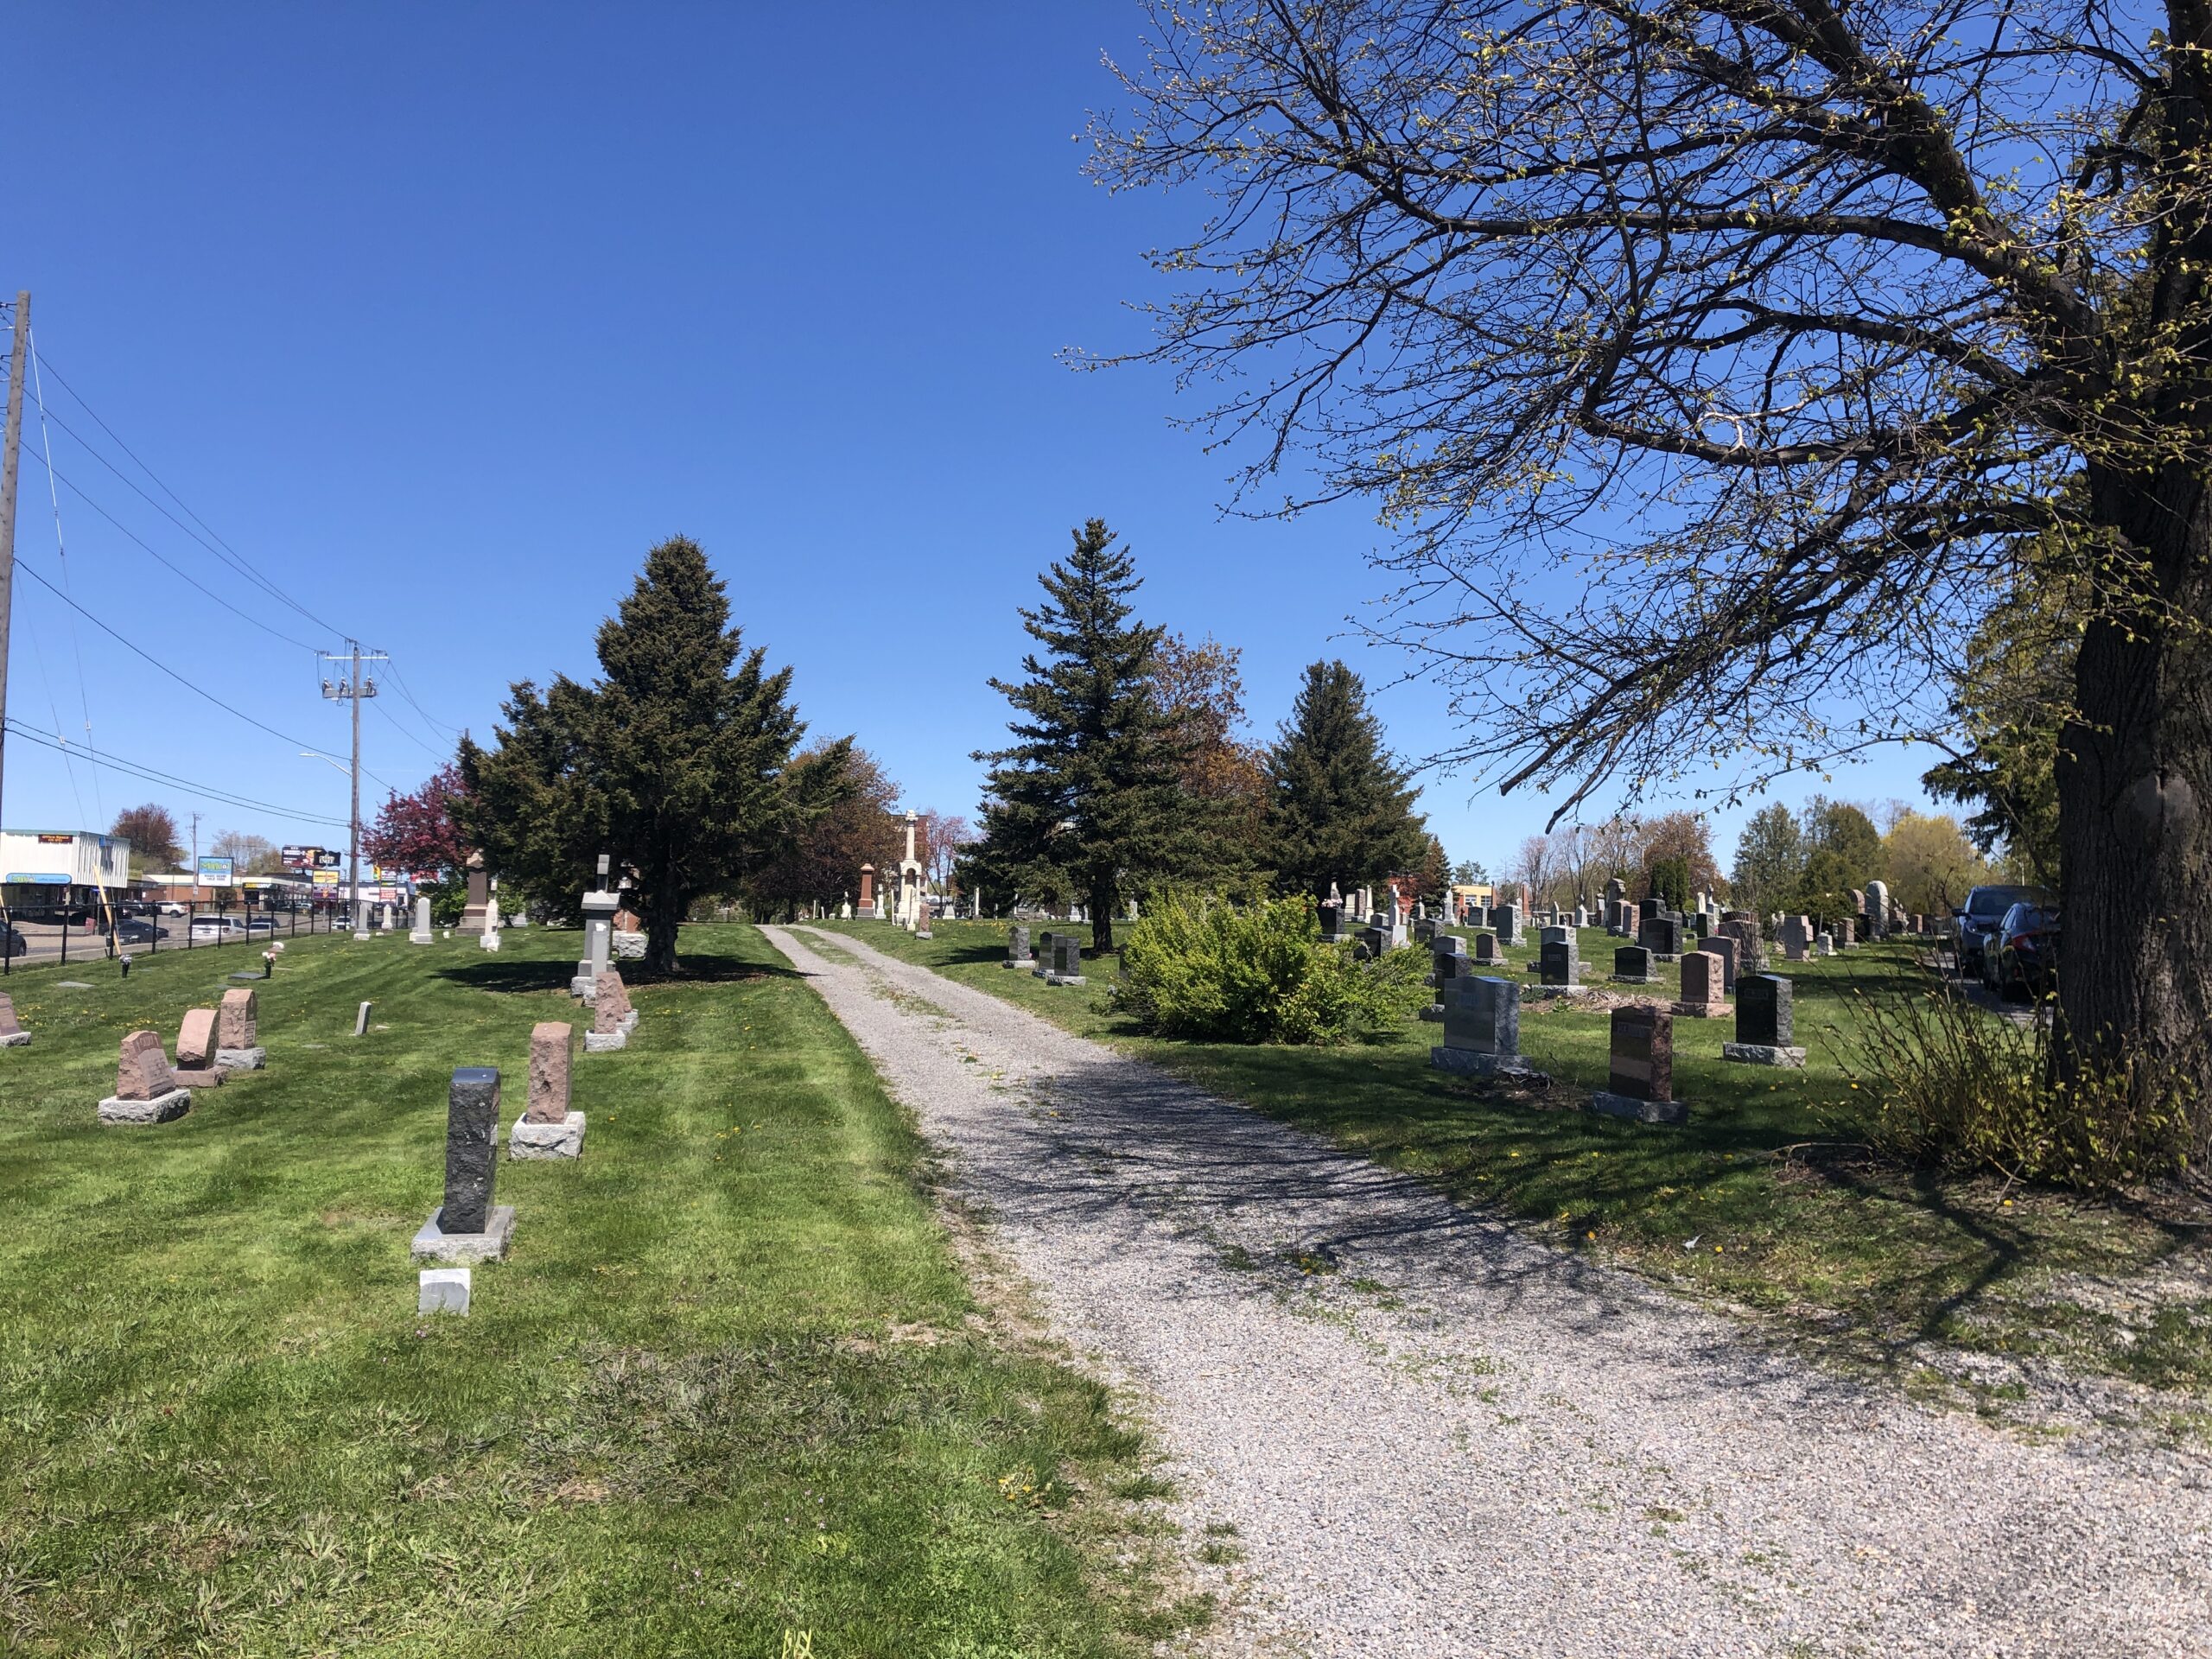 cemetery with upright headstones and a road going through the middle of the image. There are a number of trees in the cemetery